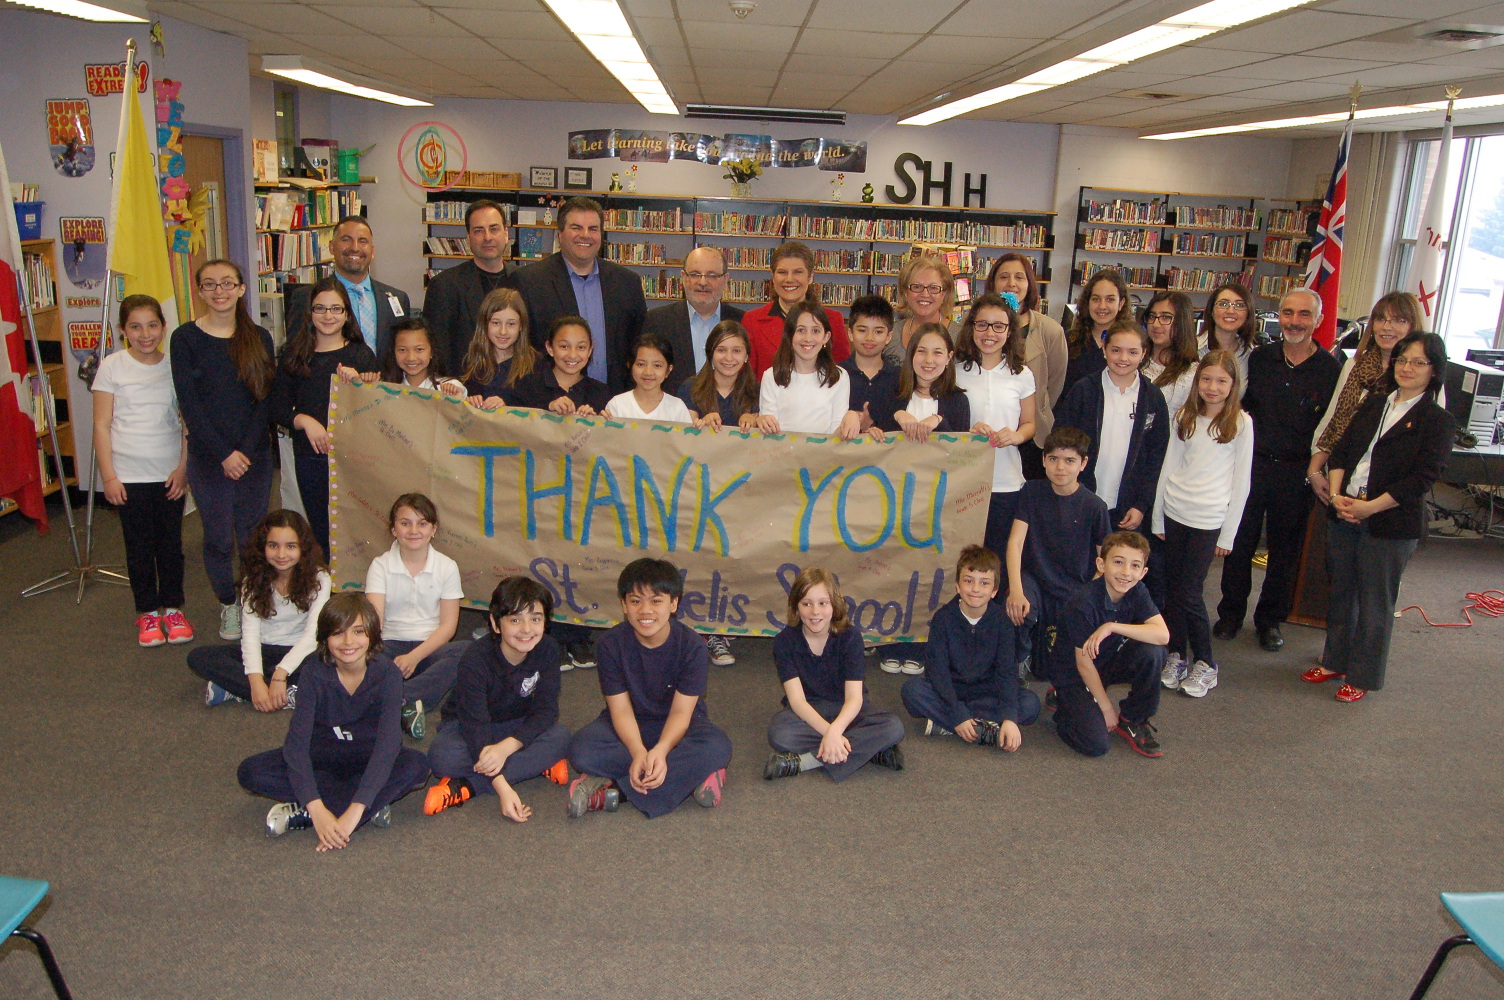 Students and staff holding up a "Thak You" banner in the library